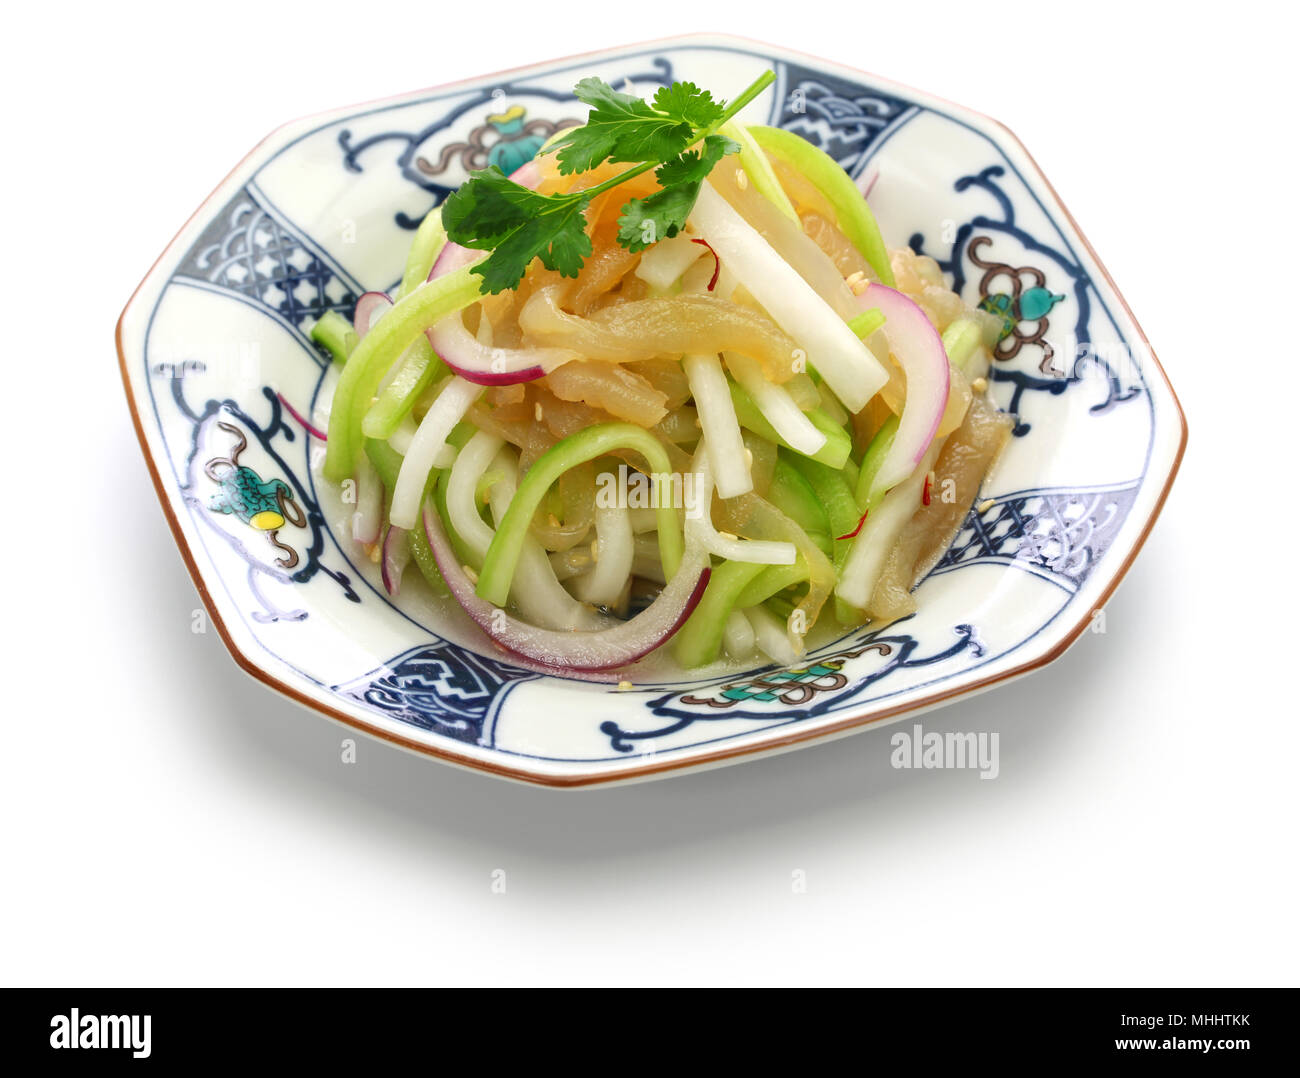 jellyfish salad, chinese cuisine, cold dish isolated on white background Stock Photo